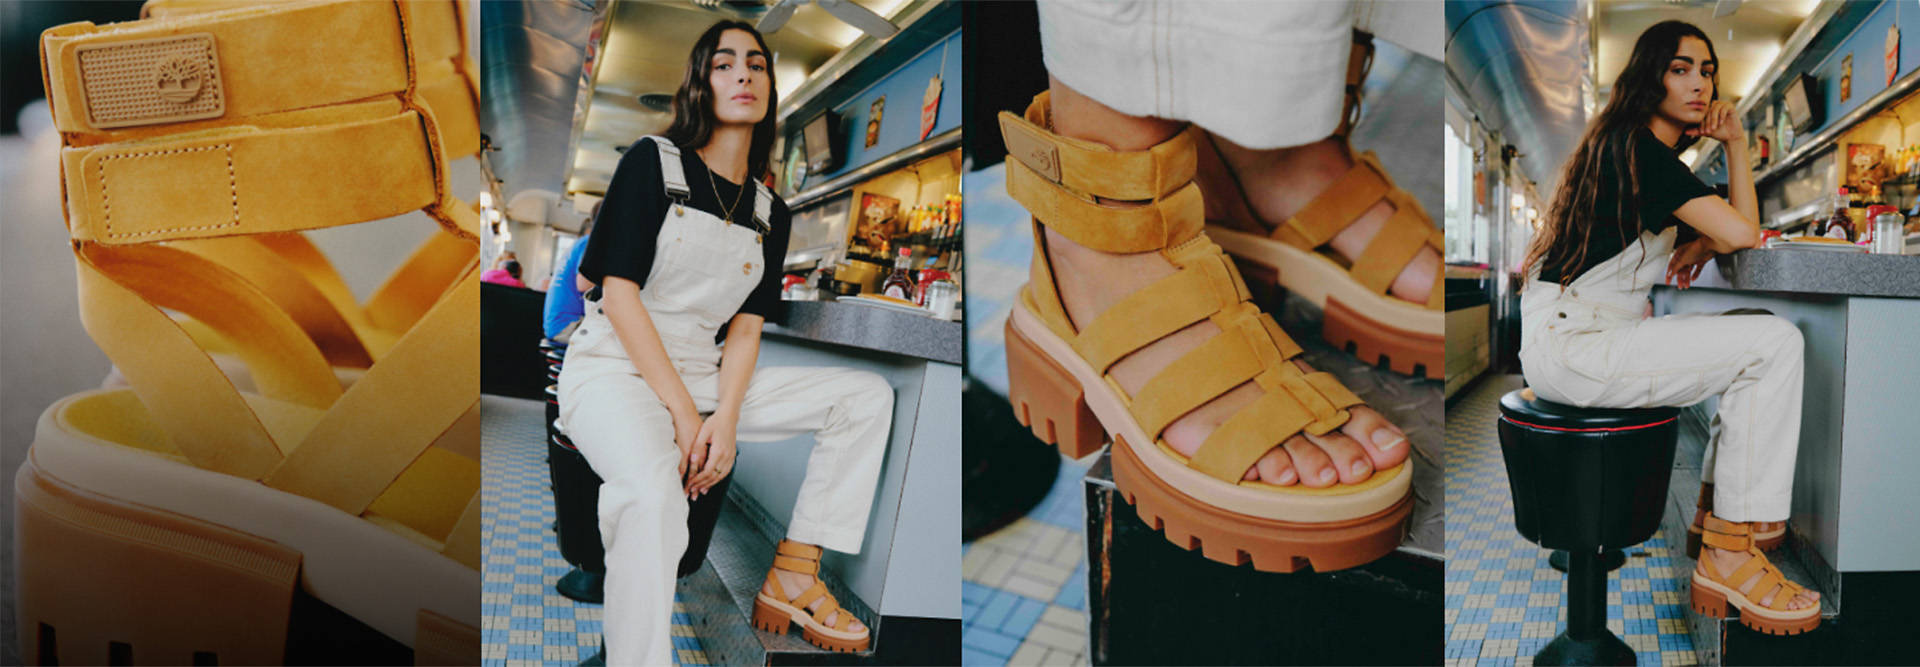 Image collage of a dark-haired young woman in a blue-and-white tiled store, wearing white overalls with a Timberland logo, a dark blue t-shirt and brown platform leather sandals.